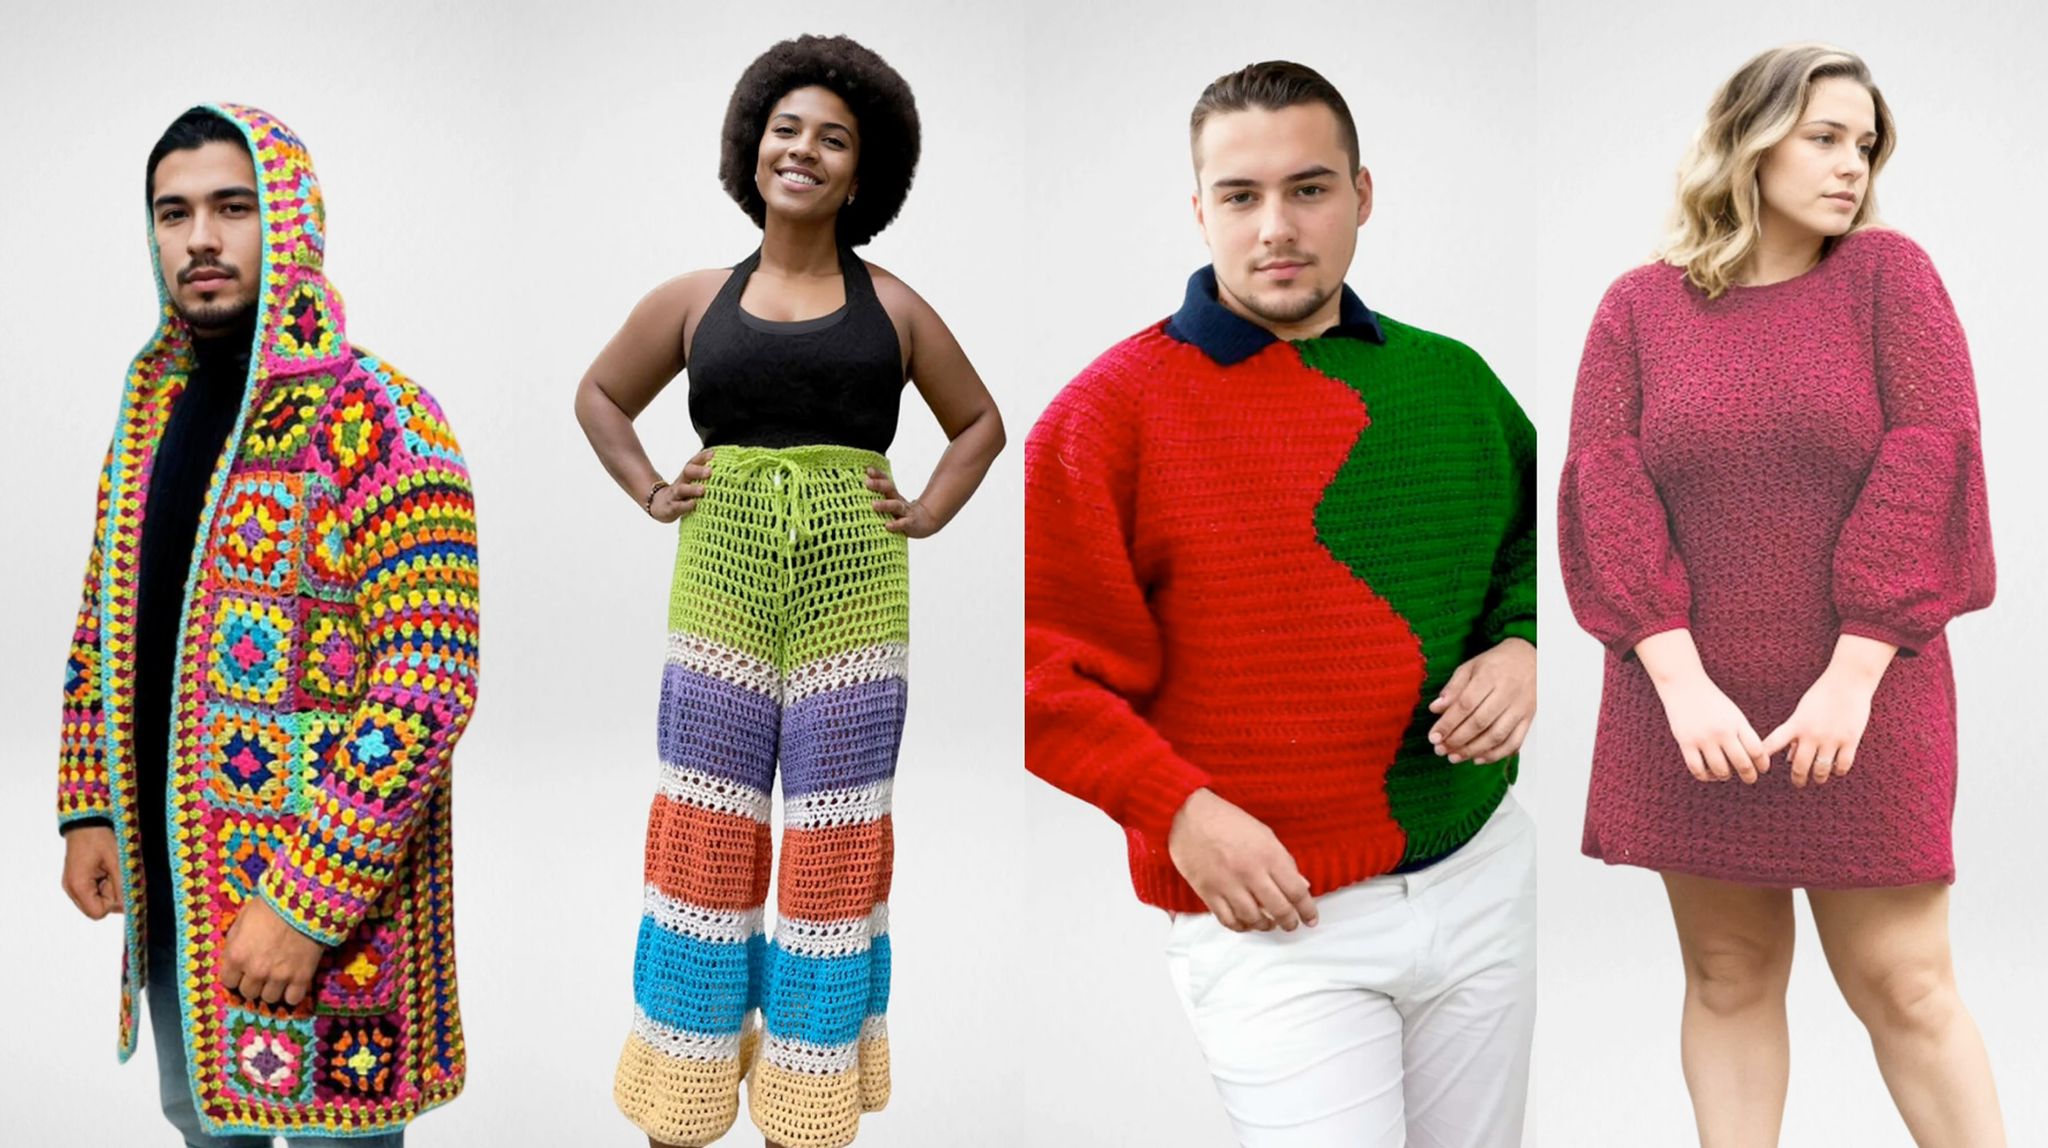 Mon Crochet: Fashion for All Body Types